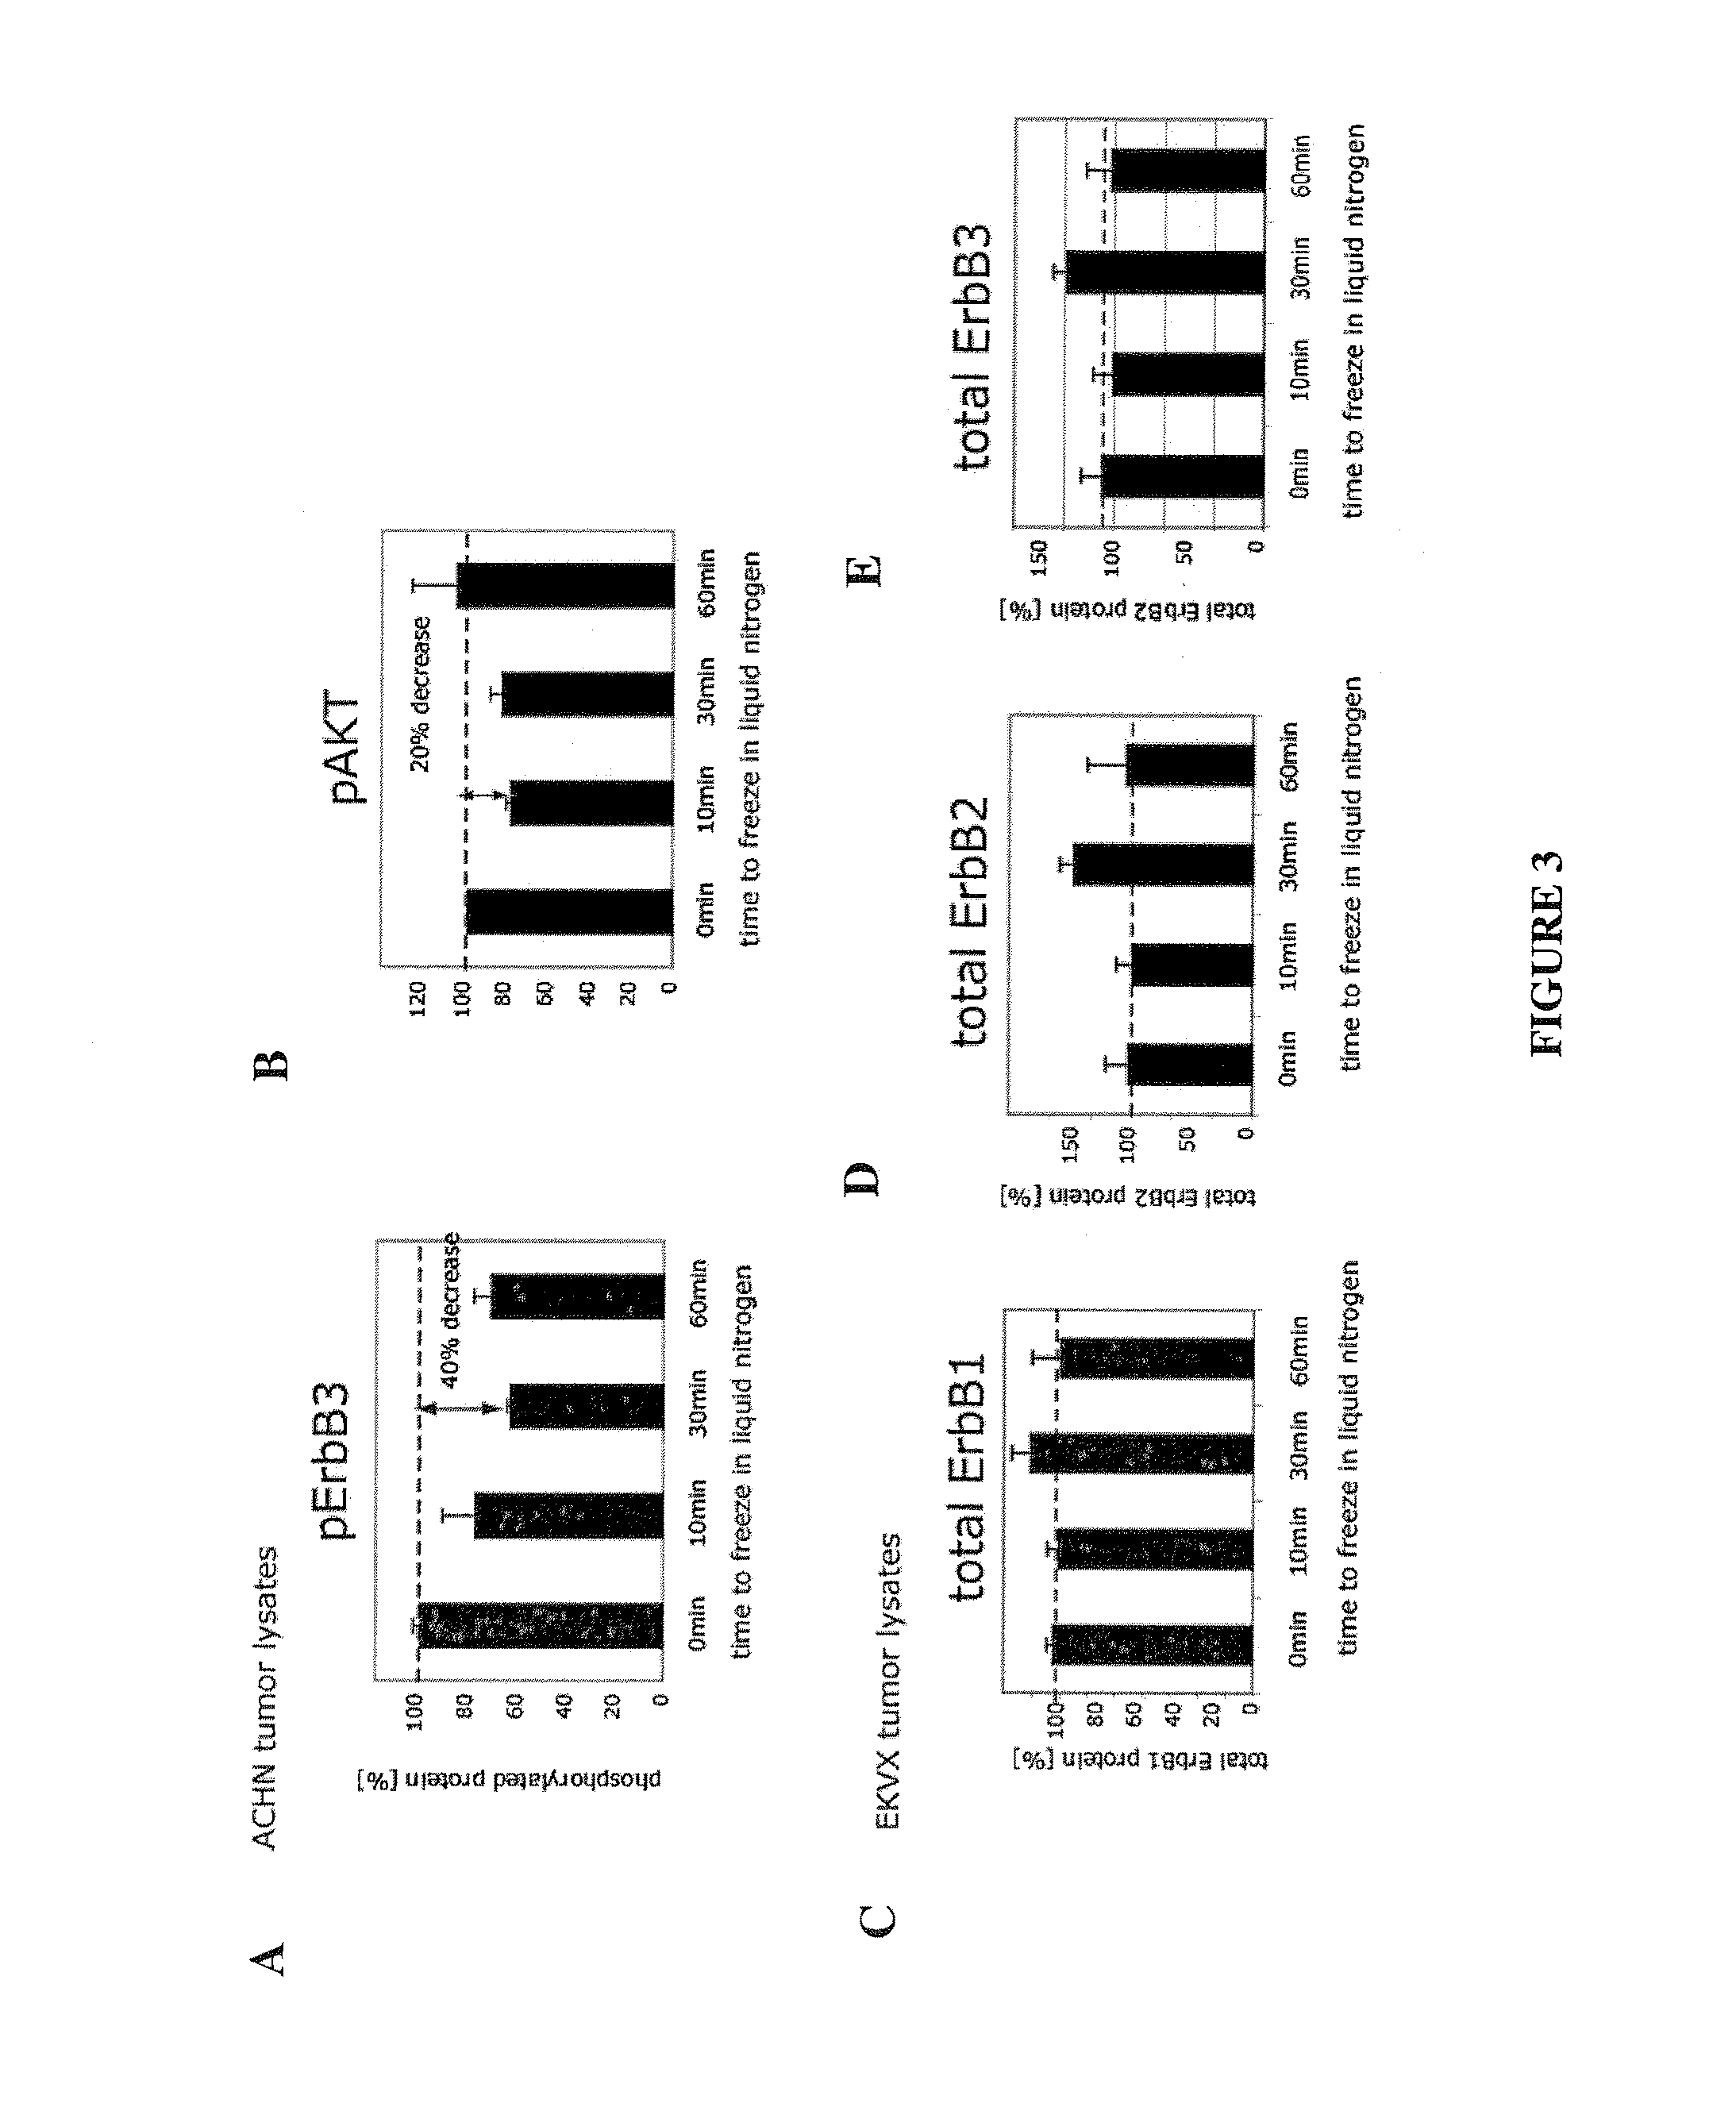 Methods, systems and products for predicting response of tumor cells to a therapeutic agent and treating a patient according to the predicted response